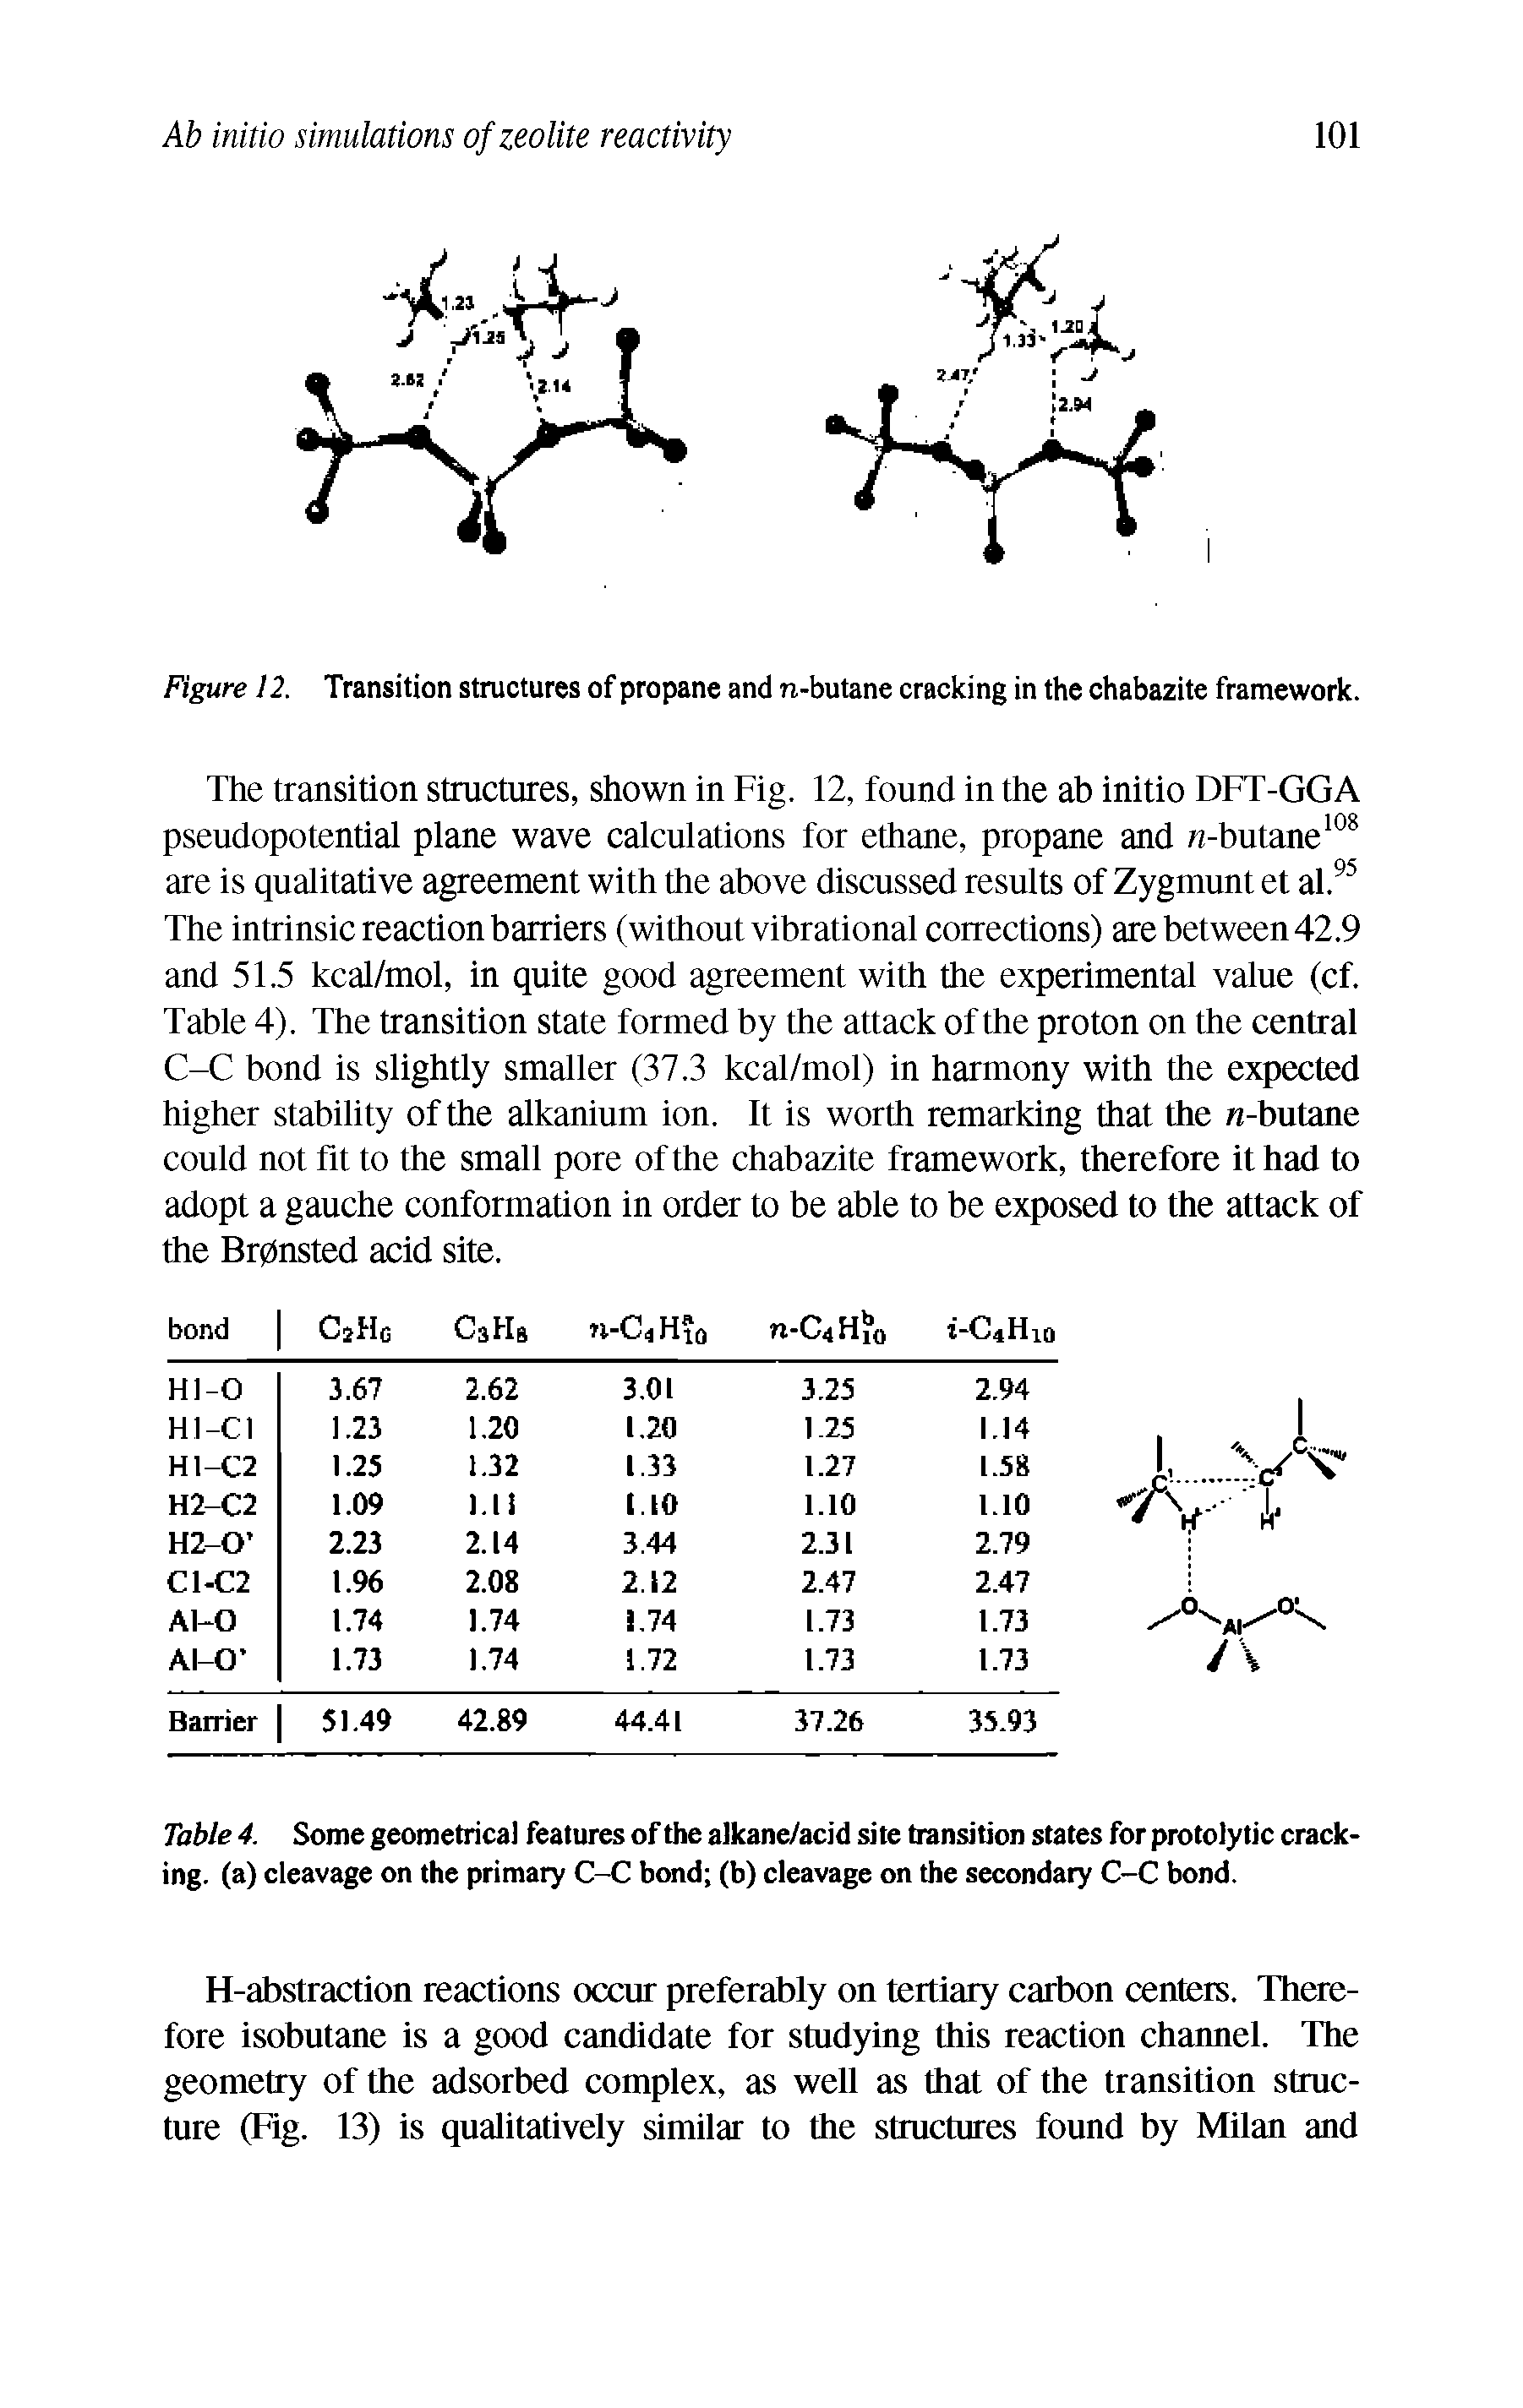 Table 4. Some geometrical features of the alkane/acid site transition states for protoly tic cracking. (a) cleavage on the primary C-C bond (b) cleavage on the secondary C-C bond.